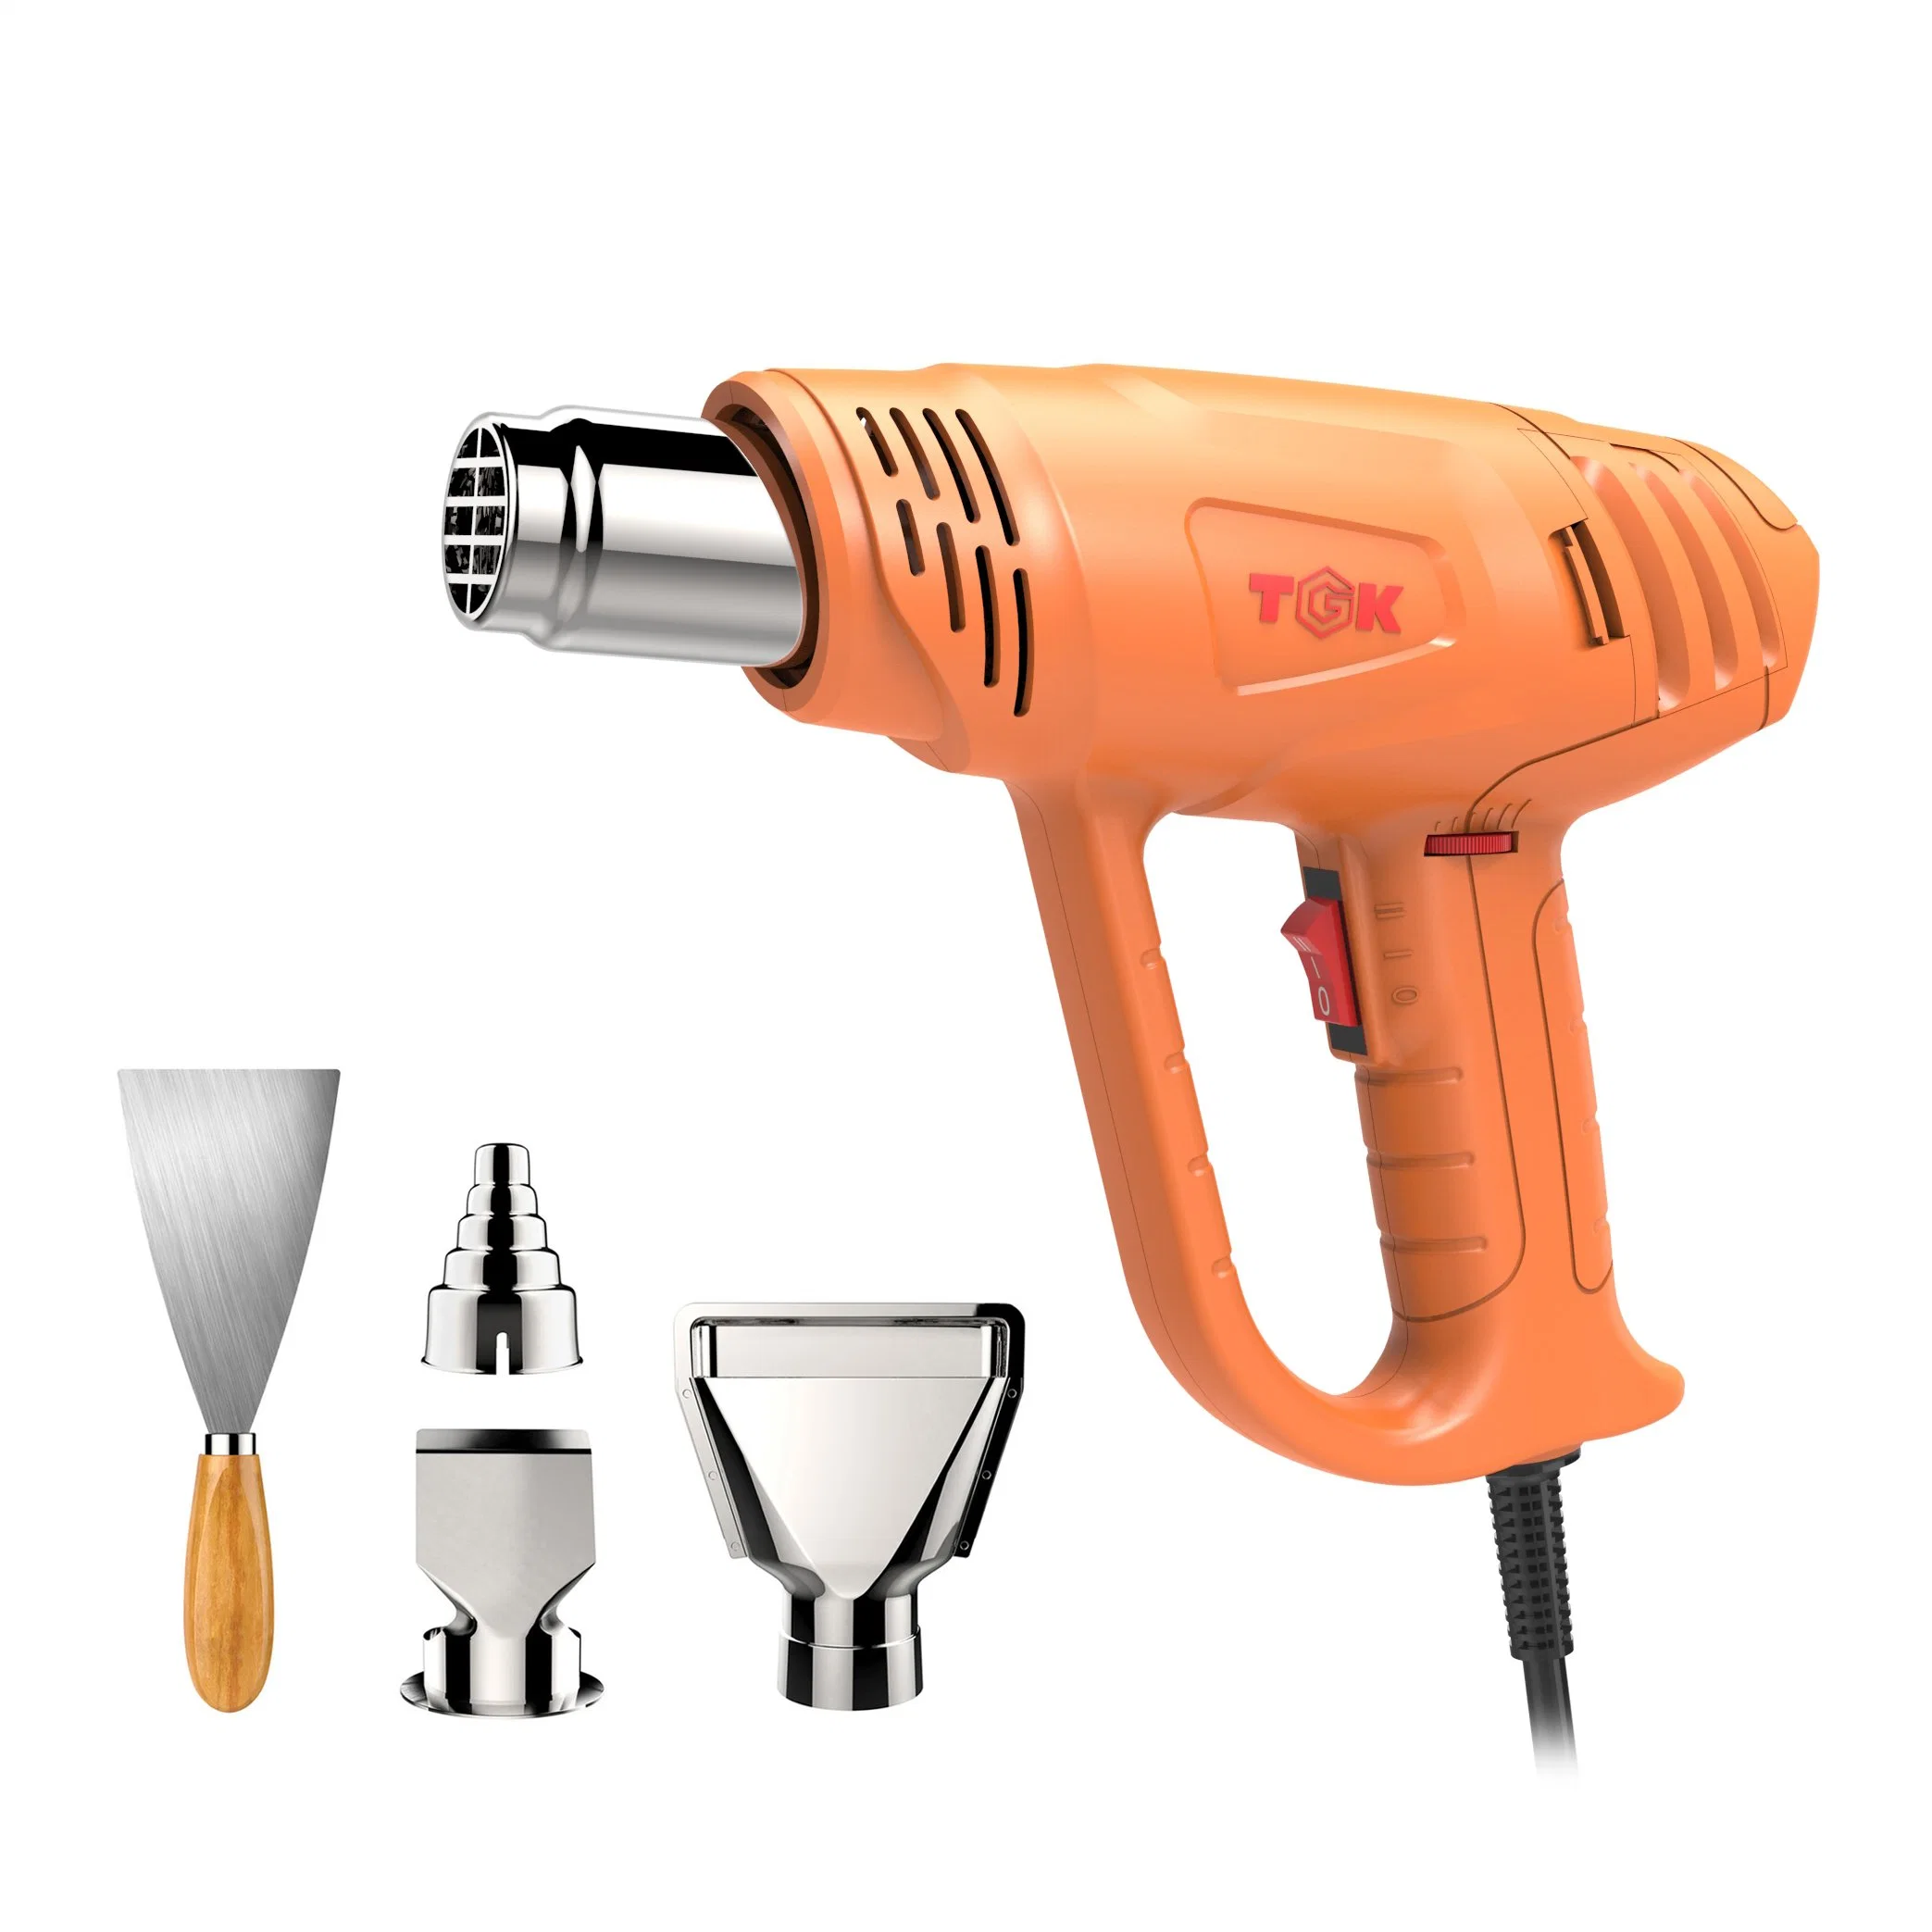 Electric Portable Heat Gun Is Suitable to Help Clean up Threading Hg5520